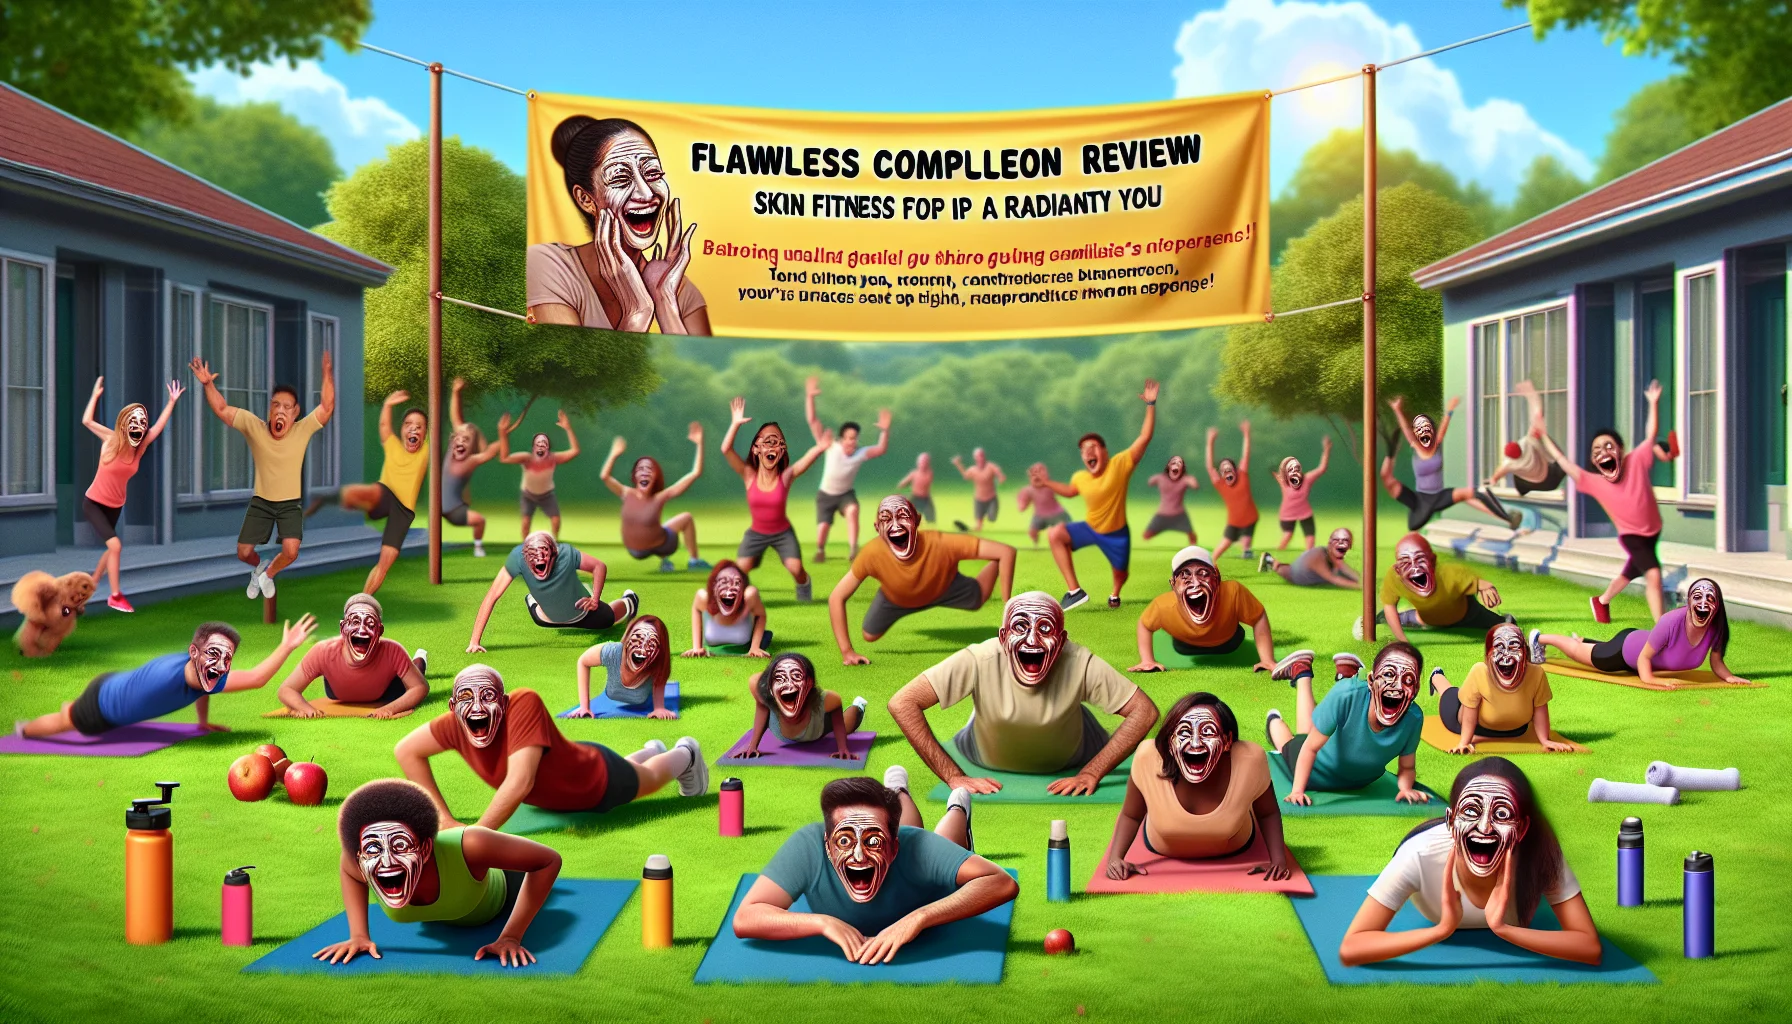 Imagine a hilarious scenario featuring a banner that reads, 'Flawless Complexion Review: Skin Fitness for a Radiant You'. Set in an outdoor park, a group of diverse individuals of different ethnicities and genders are doing exaggerated exercise routines, their faces glowing with health. Some of them are attempting to do push-ups, bursting into laughter, while others are stretching, contorting into amusing shapes. The scene is lively, with a sunny sky in the background, adding to the impressions of health and wellbeing. The humor in the scene is designed to entice and motivate viewers to engage in regular exercise.